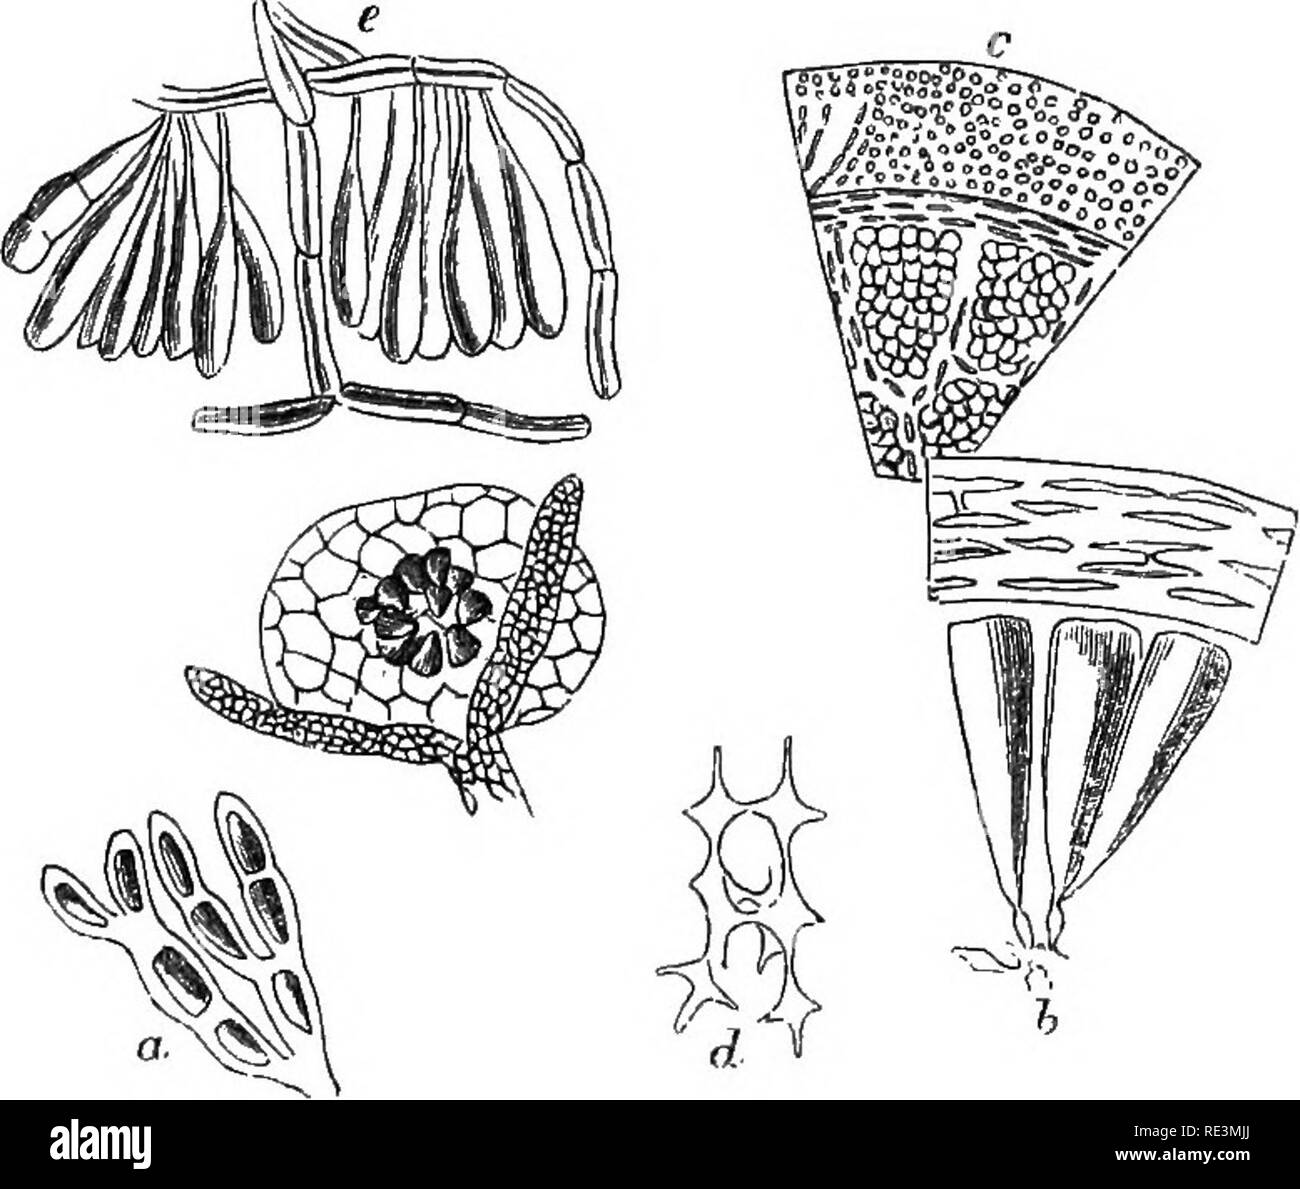 . Introduction to cryptogamic botany. Cryptogams. INTRODUCTION TO CRYPTOGAMIC BOTANY, 179 coasts. Crouama is remarkable for possessing the habit of Batrachospermum. Halurus and Oriffiihsia, have their representatives all round our coasts, but are also found in the southern hemisphere, where also a large number of species of Oallithamnion occur, though they are more numerous northwards. 2. Spyridiace^, Harv. (Spyridiew, J. Ag.). Fig. 44. a. Conceptacle of Spyridia flamentosa, Harvey, magnified. From a specimen communicated by Mrs. Griffiths,* with the threads in which the spores are generated f Stock Photo